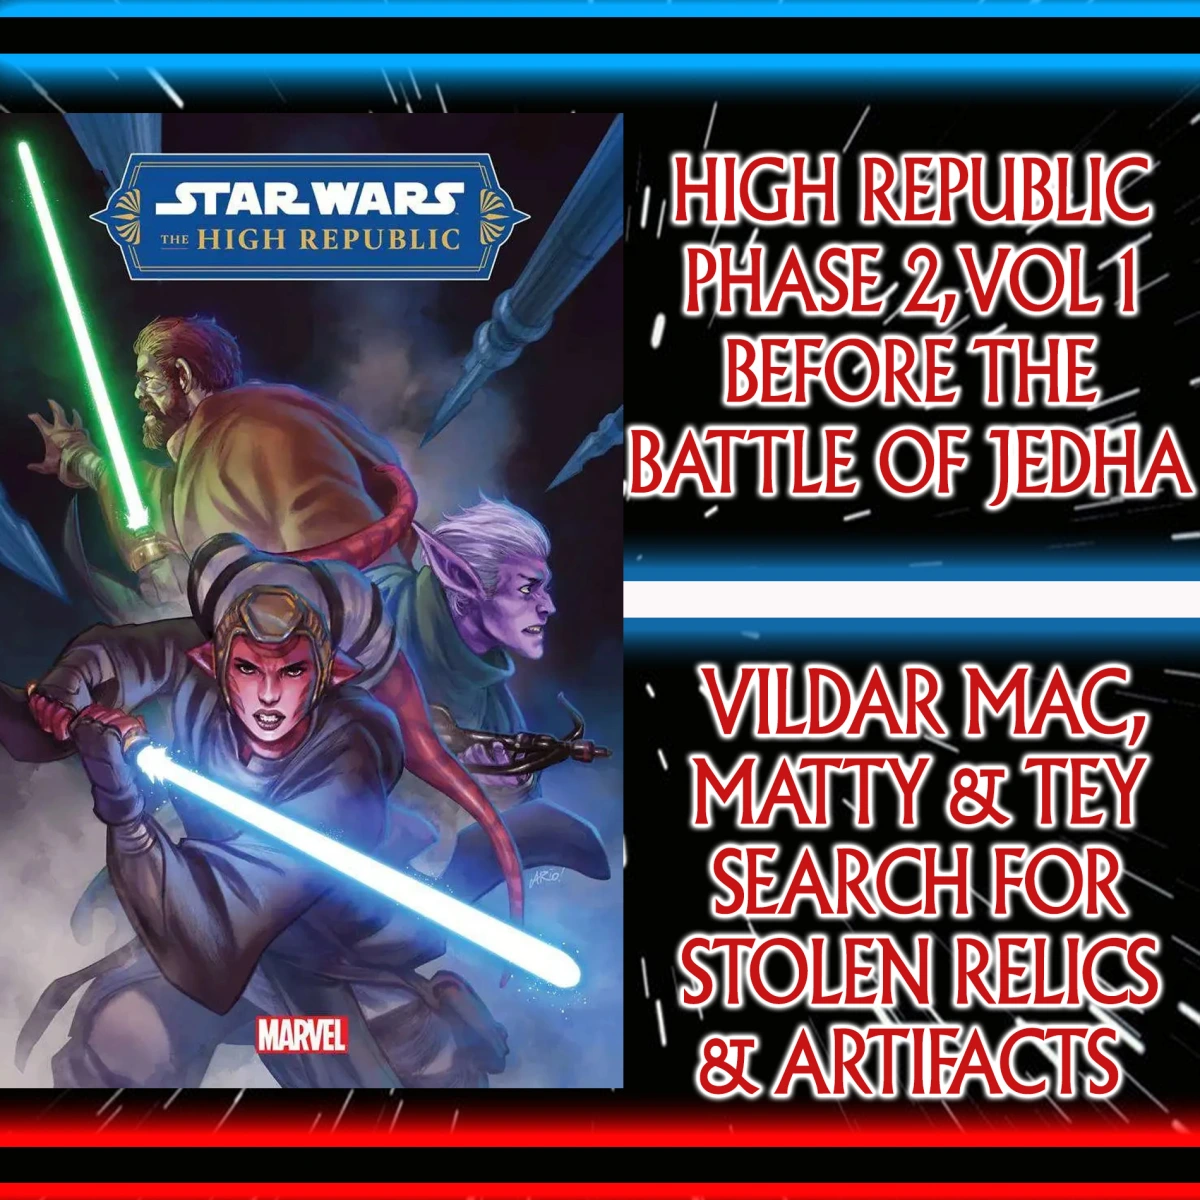 Star Wars: Comics In Canon – Before The Battle Of Jedha, Vildar Mac, Matty & Tey Search For Stolen Artifacts (High Republic [2022] Vol 1: Balance Of The Force #1-5) – Ep 126